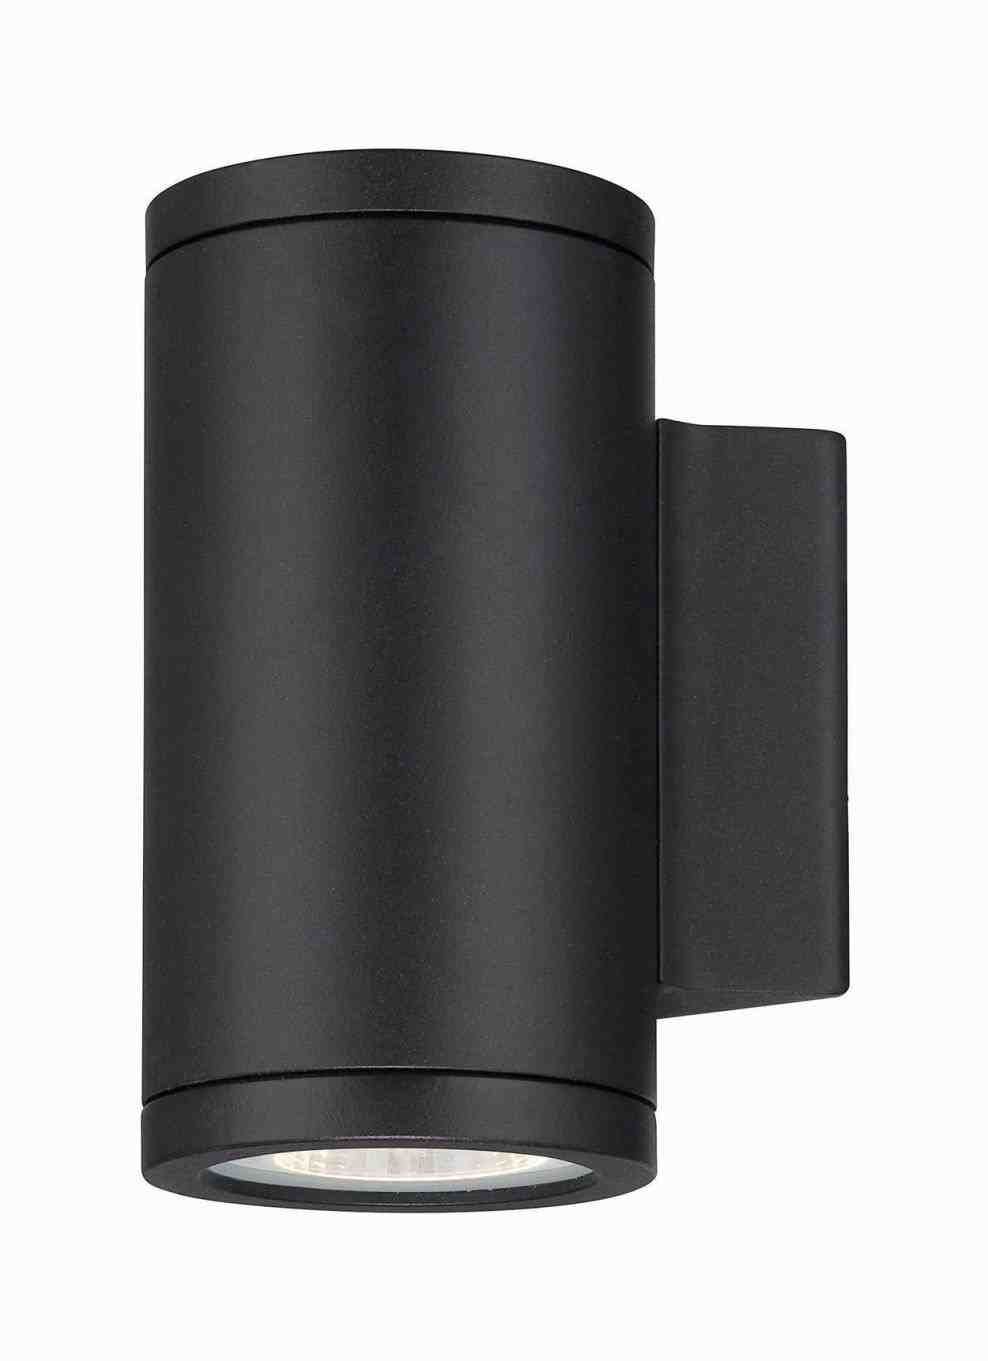 Light Led Outdoor Wall Light Duluthhomeloanrhduluthhomeloancom In Outdoor Wall Sconce Led Lights (View 11 of 15)